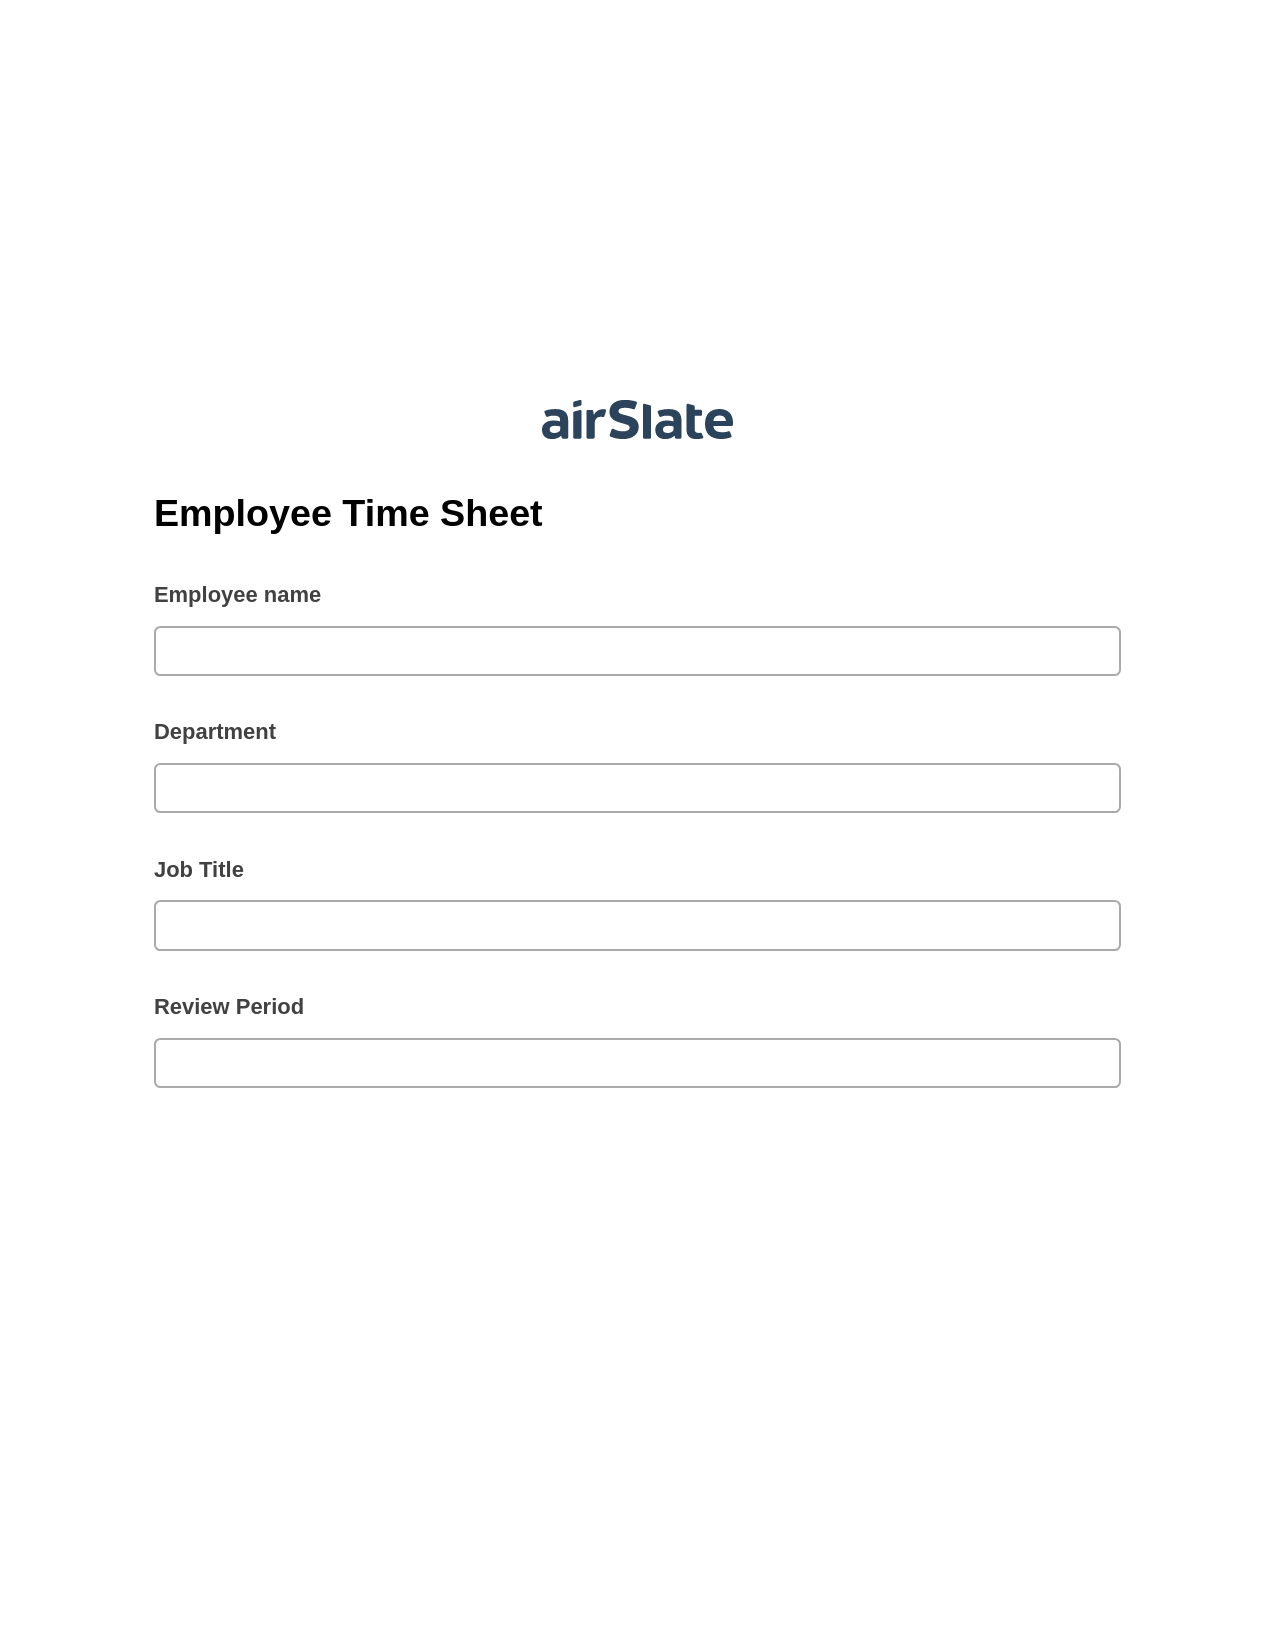 Multirole Employee Time Sheet Pre-fill from MS Dynamics 365 Records, Create Salesforce Records Bot, Archive to SharePoint Folder Bot